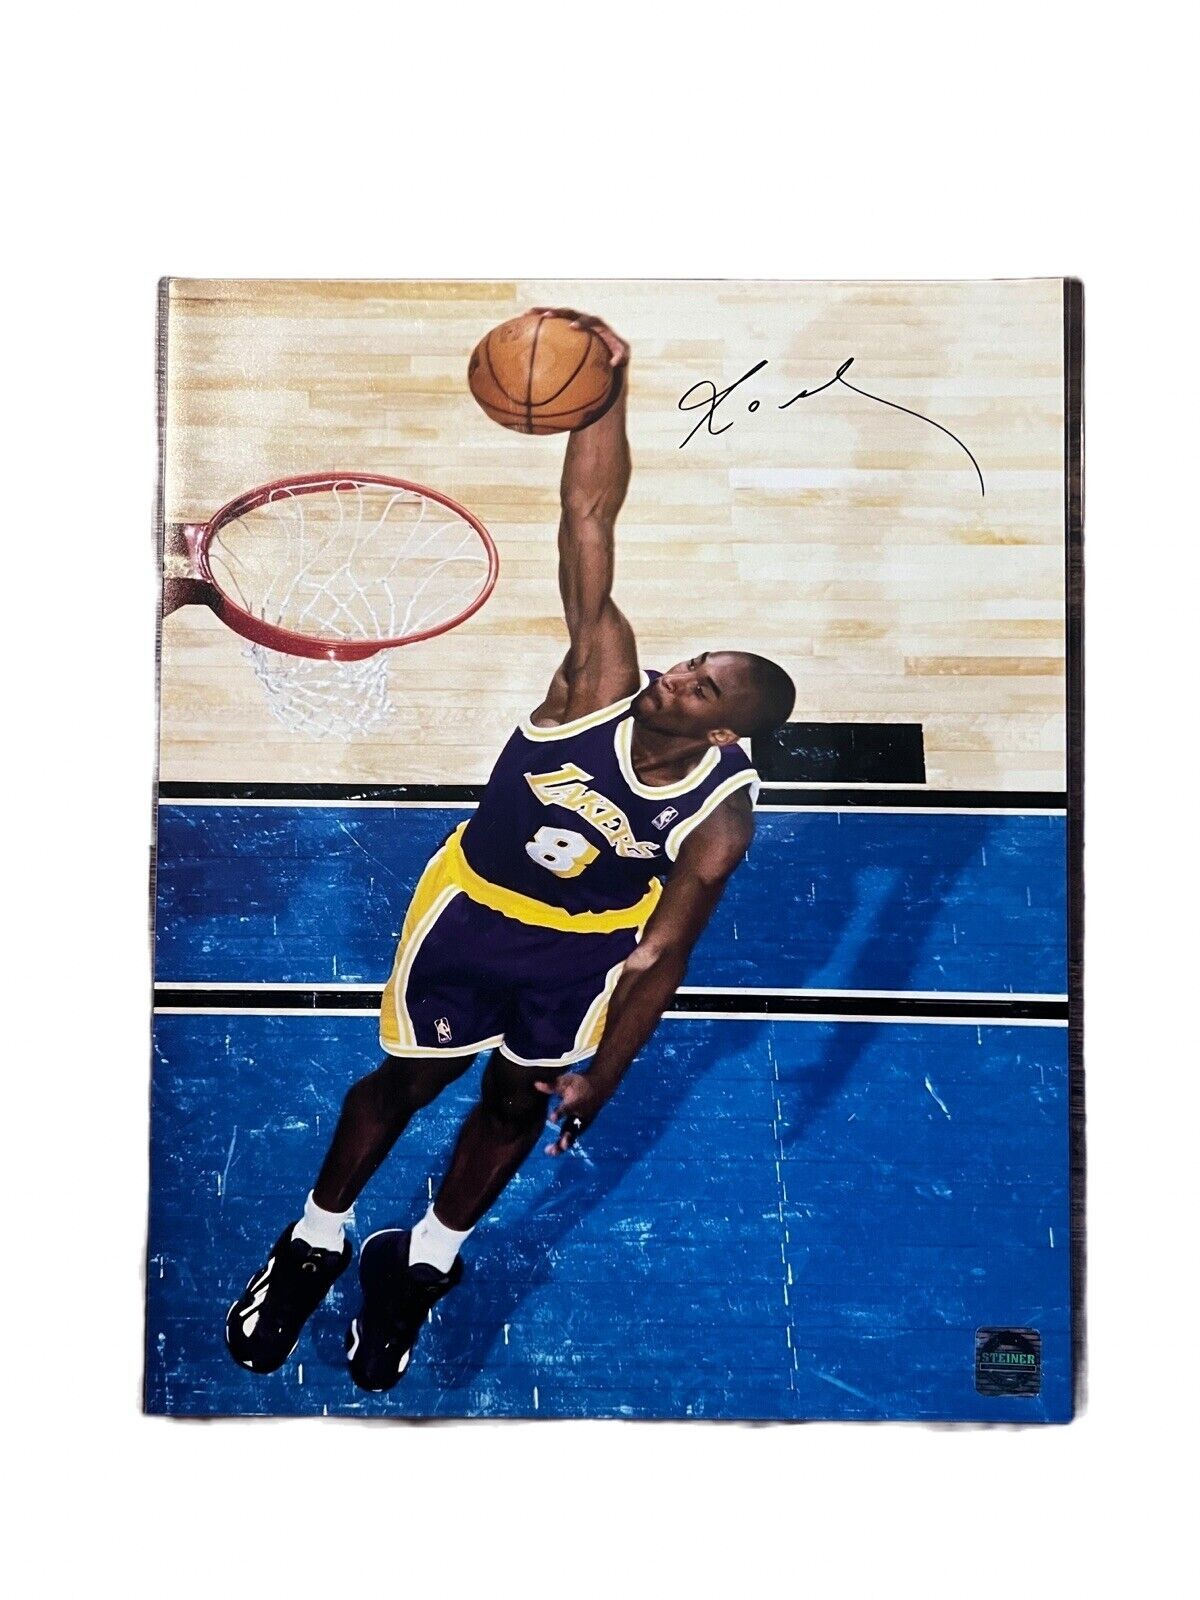 Official Kobe Bryant Signed Jersey, All-Star Game 2003 - CharityStars